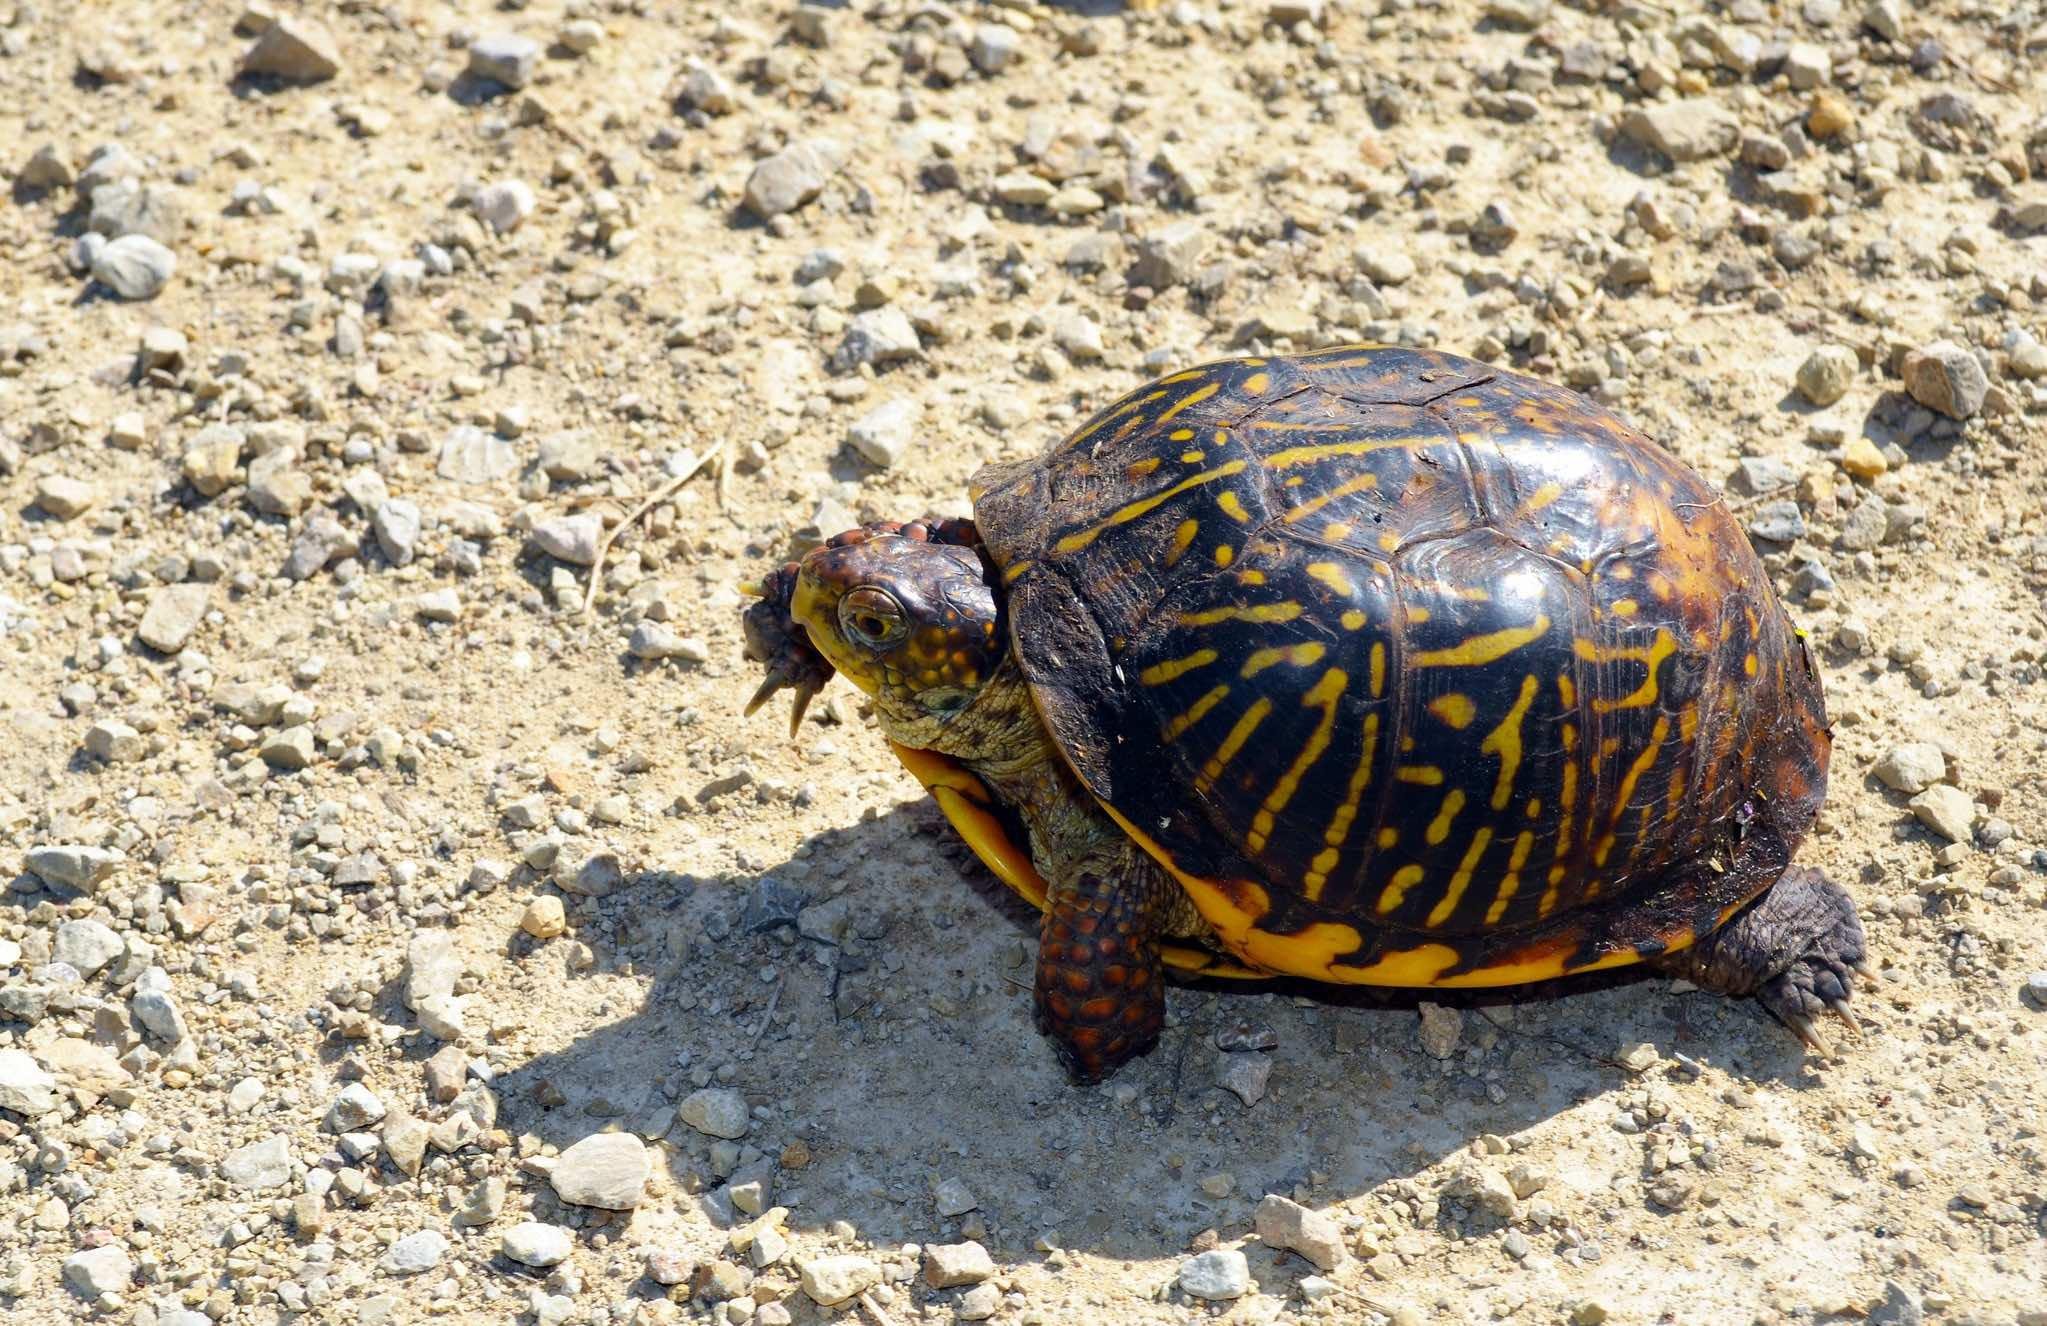 Ornate box turtles are doubly threatened by loss of habitat and illegal poaching. (Joanna Gilkeson / U.S. Fish and Wildlife Service Midwest Region)